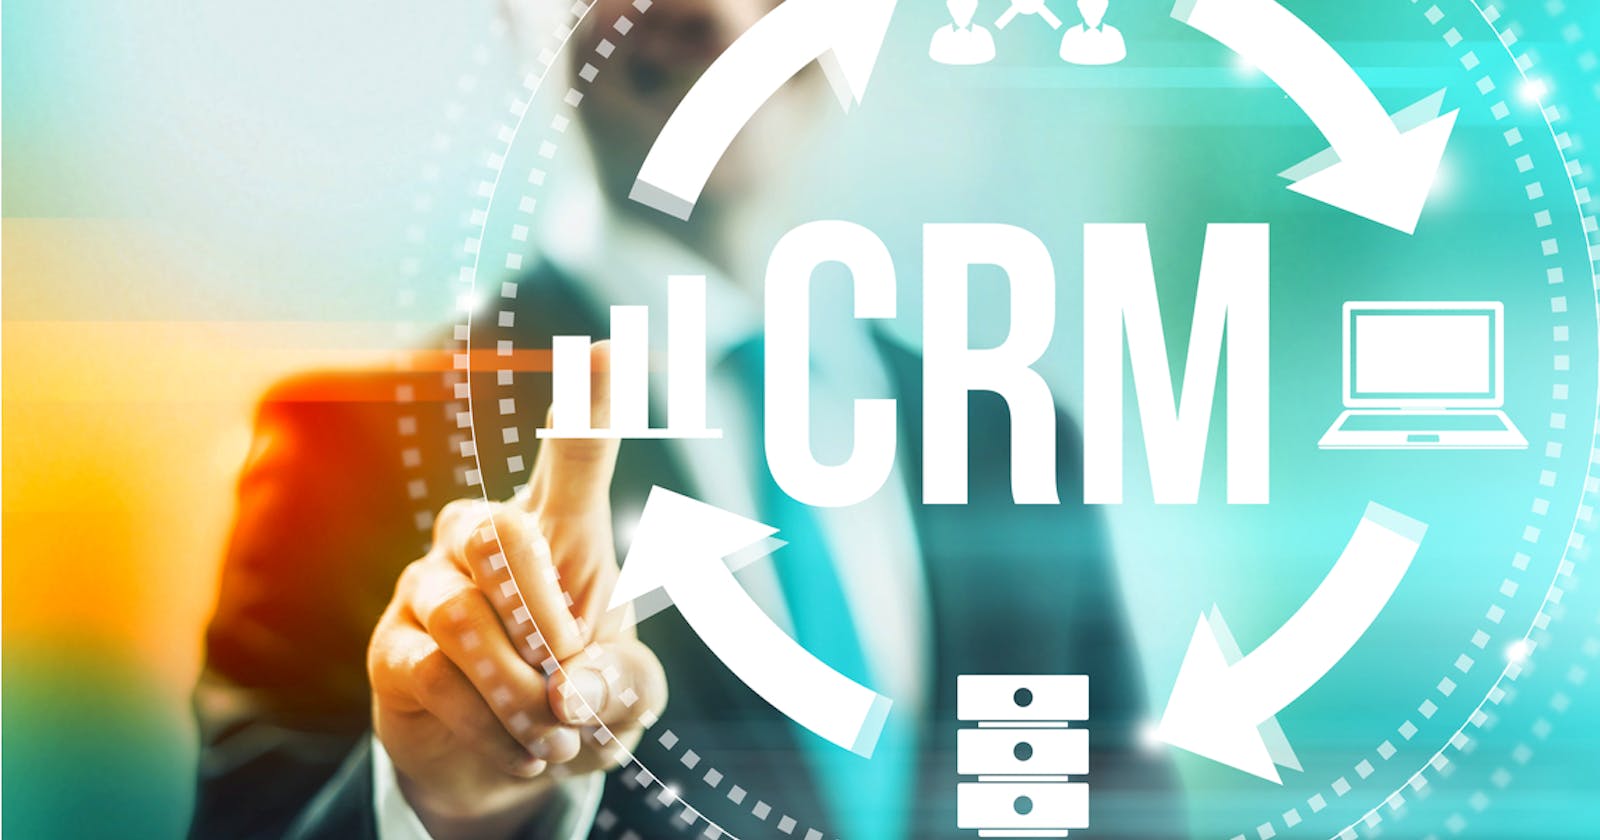 Top 3 CRM To Improve Business Productivity and Sales